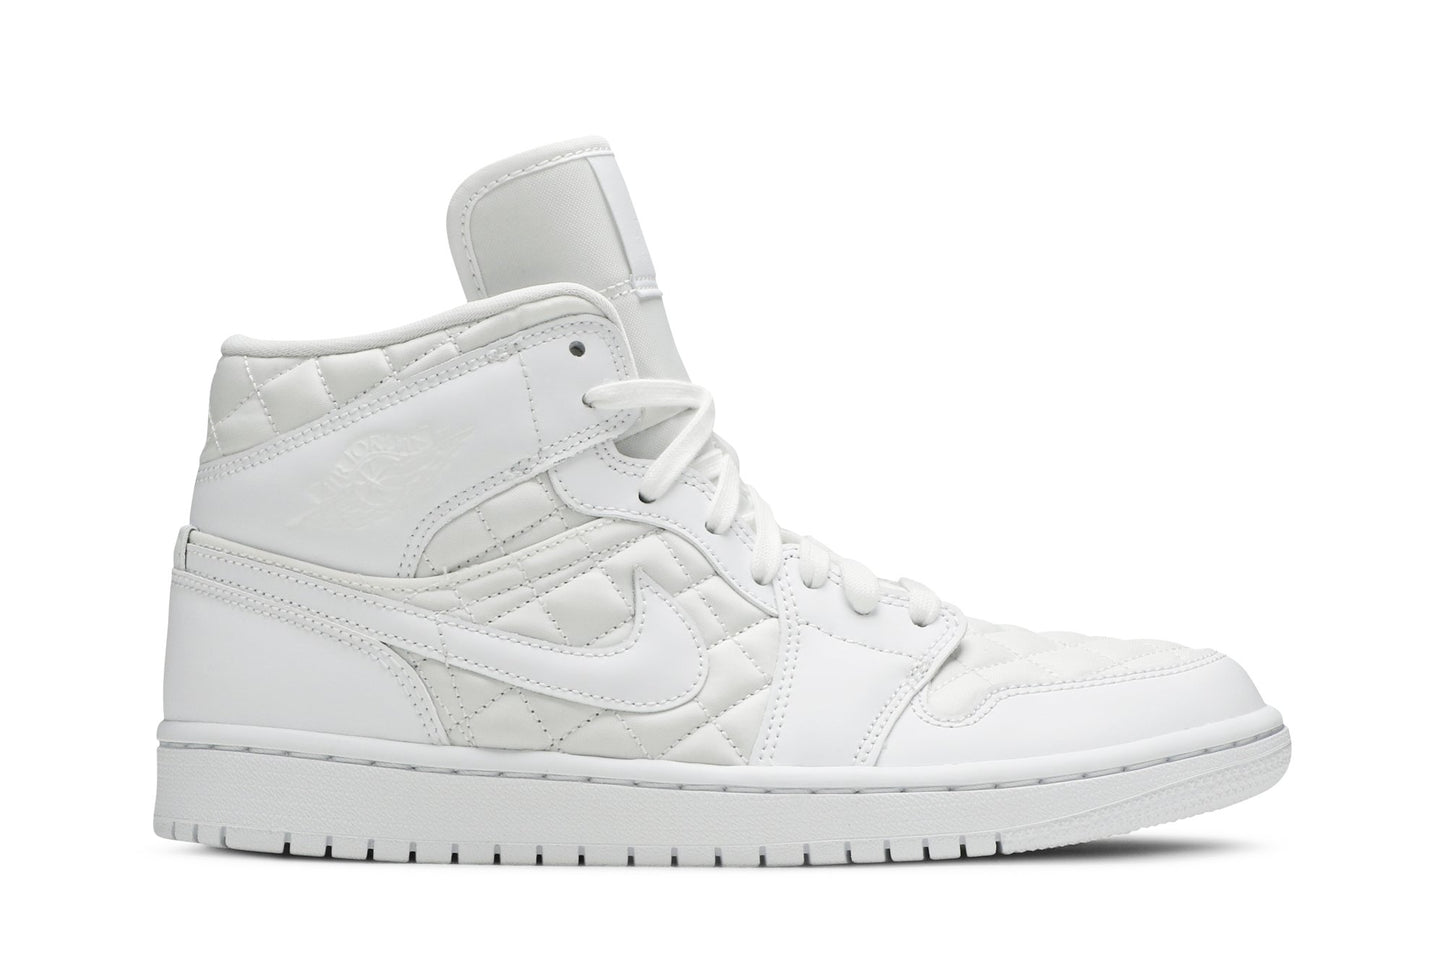 Wmns Air Jordan 1 Mid SE 'White Quilted' DB6078-100